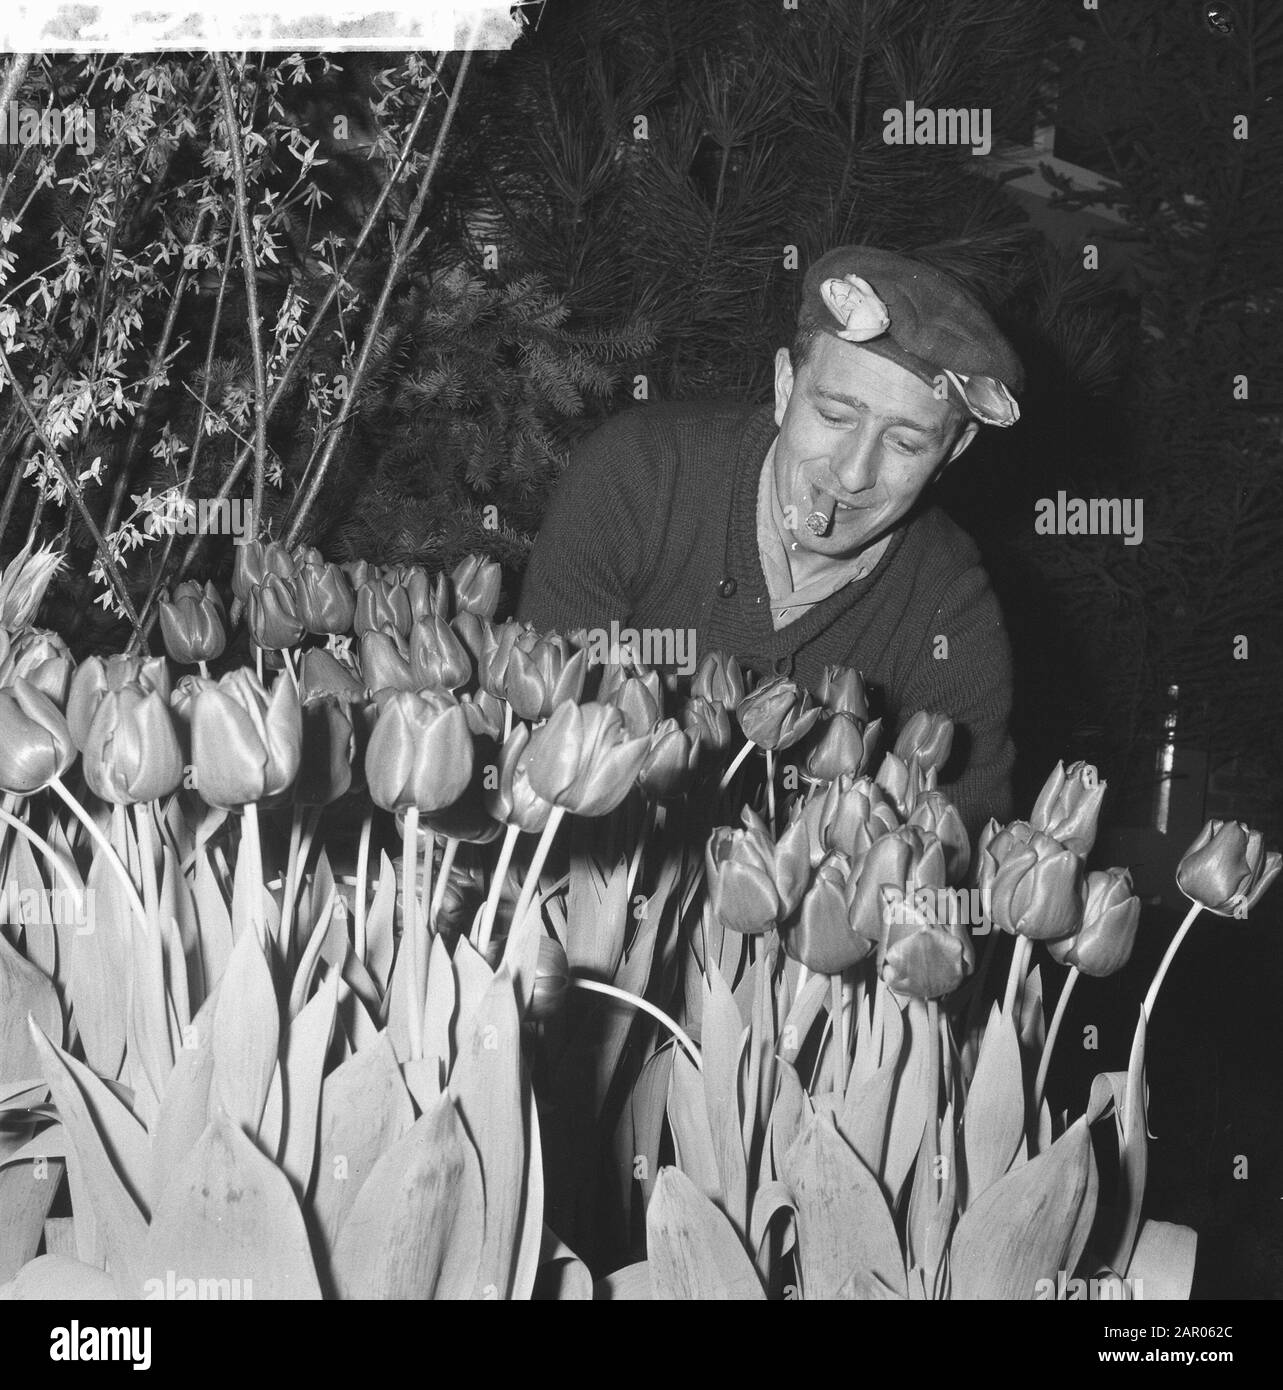 Westfriese Flora 1962 (about 700 bulbous plants). Jan Rood with his entry Date: 19 February 1962 Location: Bovenkarspel, Noord-Holland Keywords: flowers, bulbs, exhibitions Personal name: Rood, Jan Stock Photo